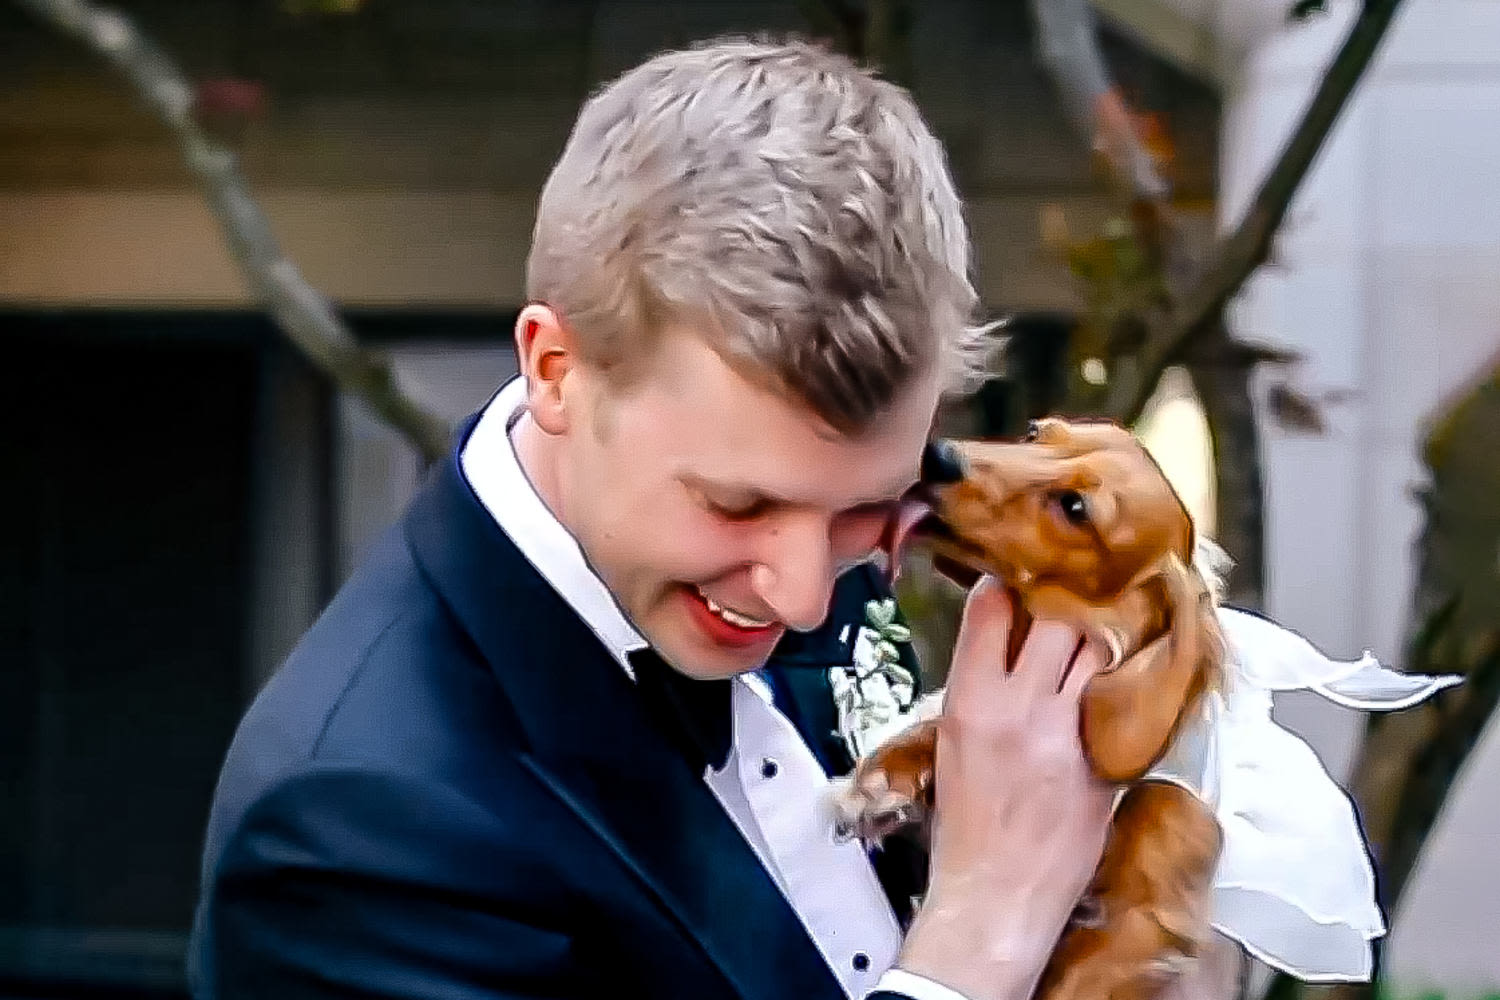 Video of groom turning for surprise first look with his puppy goes viral: 'I had no idea'